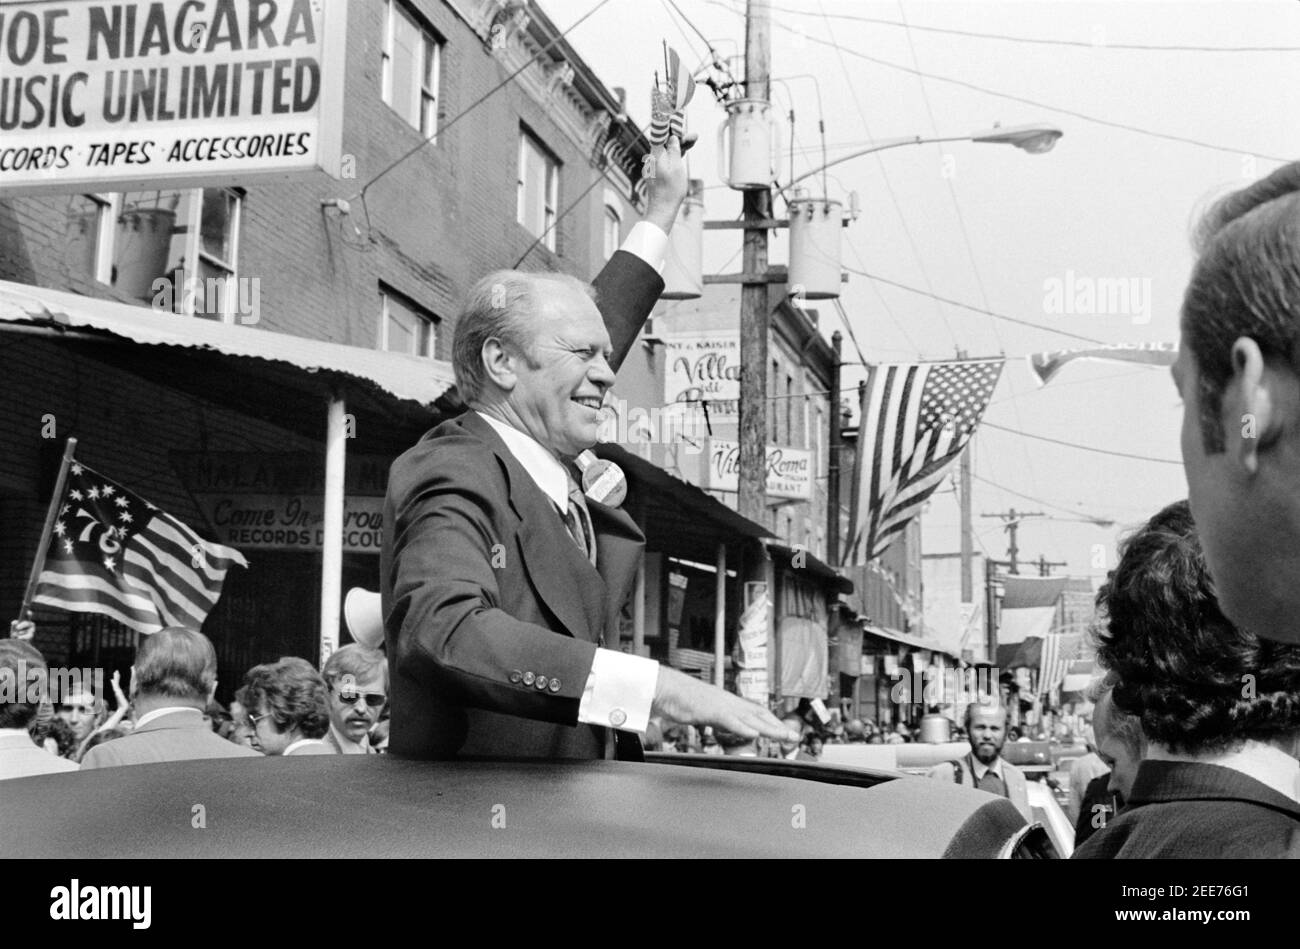 U.S. President Gerald Ford waves to crowd from the sunroof of a car in Philadelphia, Pennsylvania, USA, Marion S. Trikosko, September 1976 Stock Photo